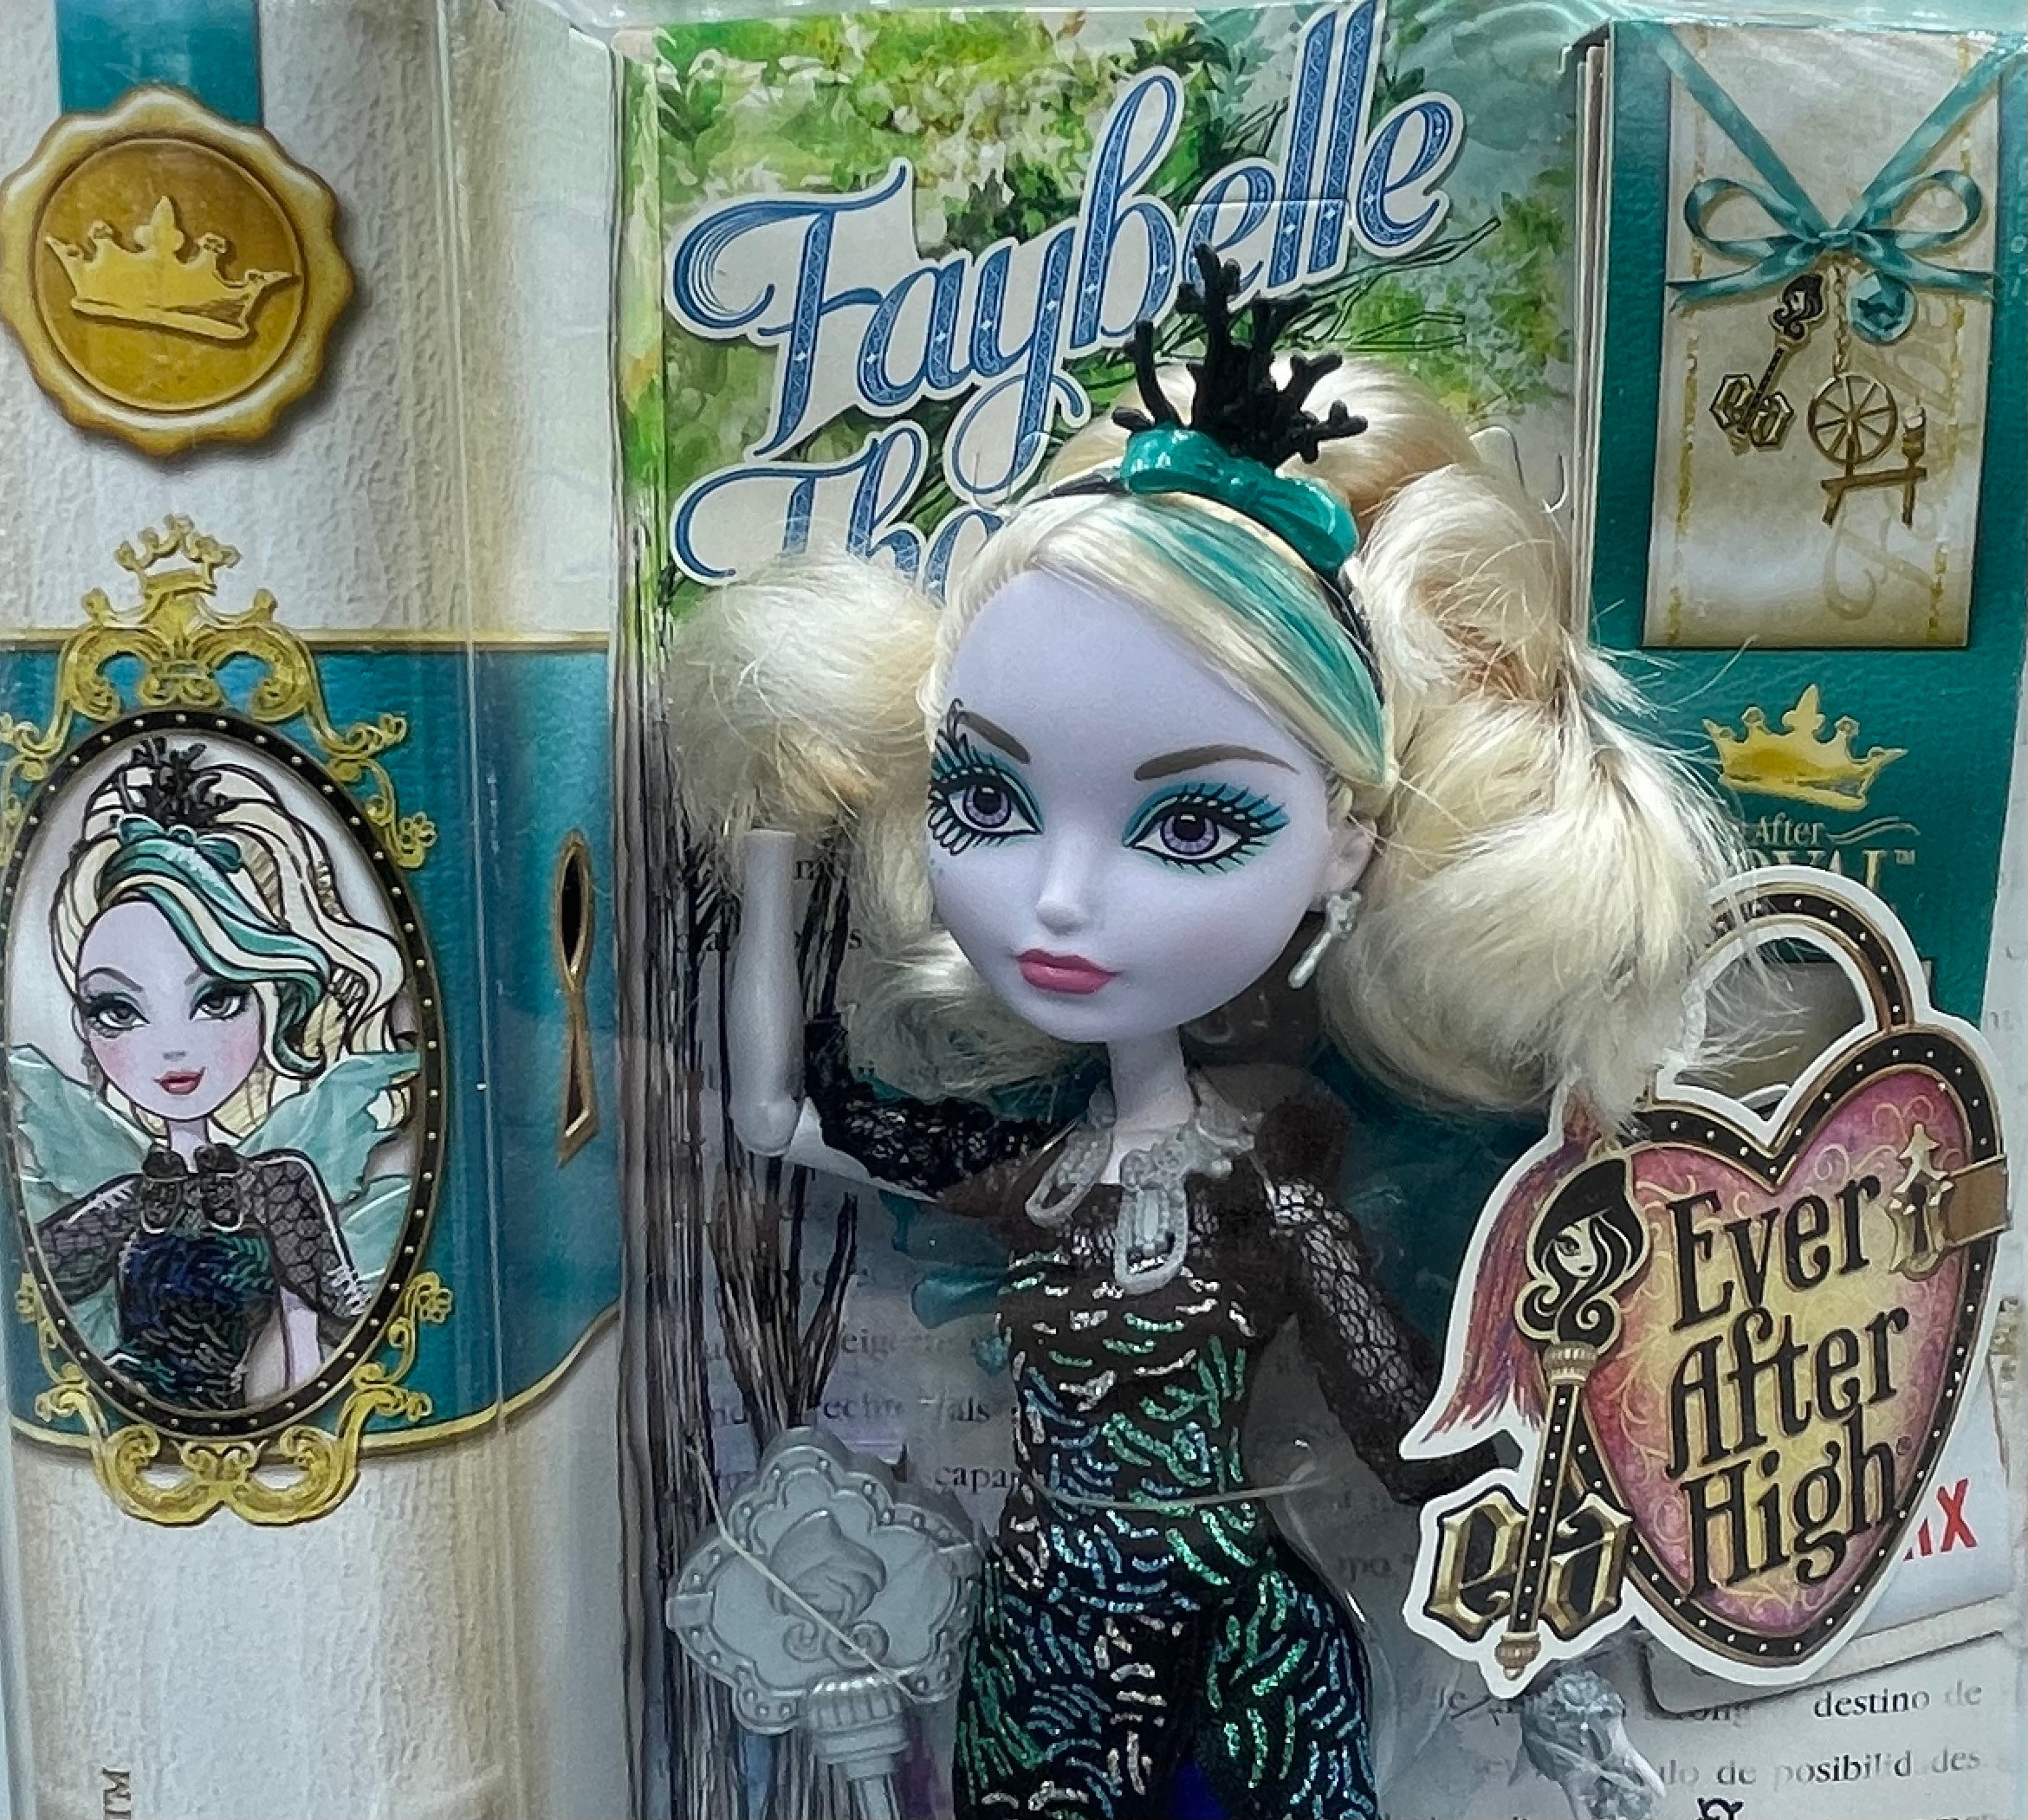 Ever After High Faybelle Thorn Doll 1st Edition version 